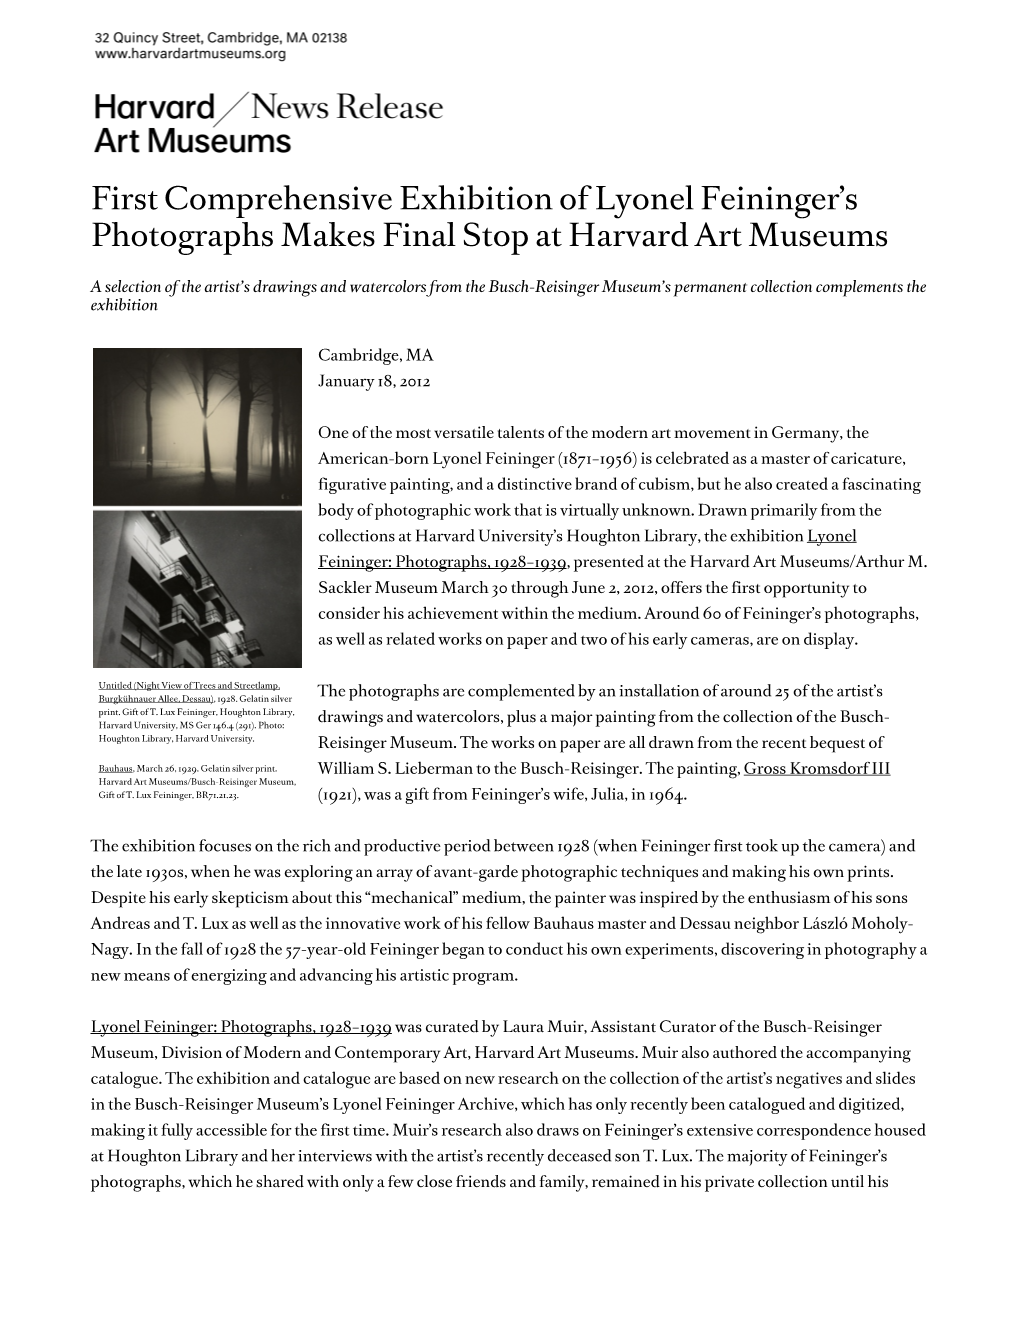 First Comprehensive Exhibition of Lyonel Feininger's Photographs